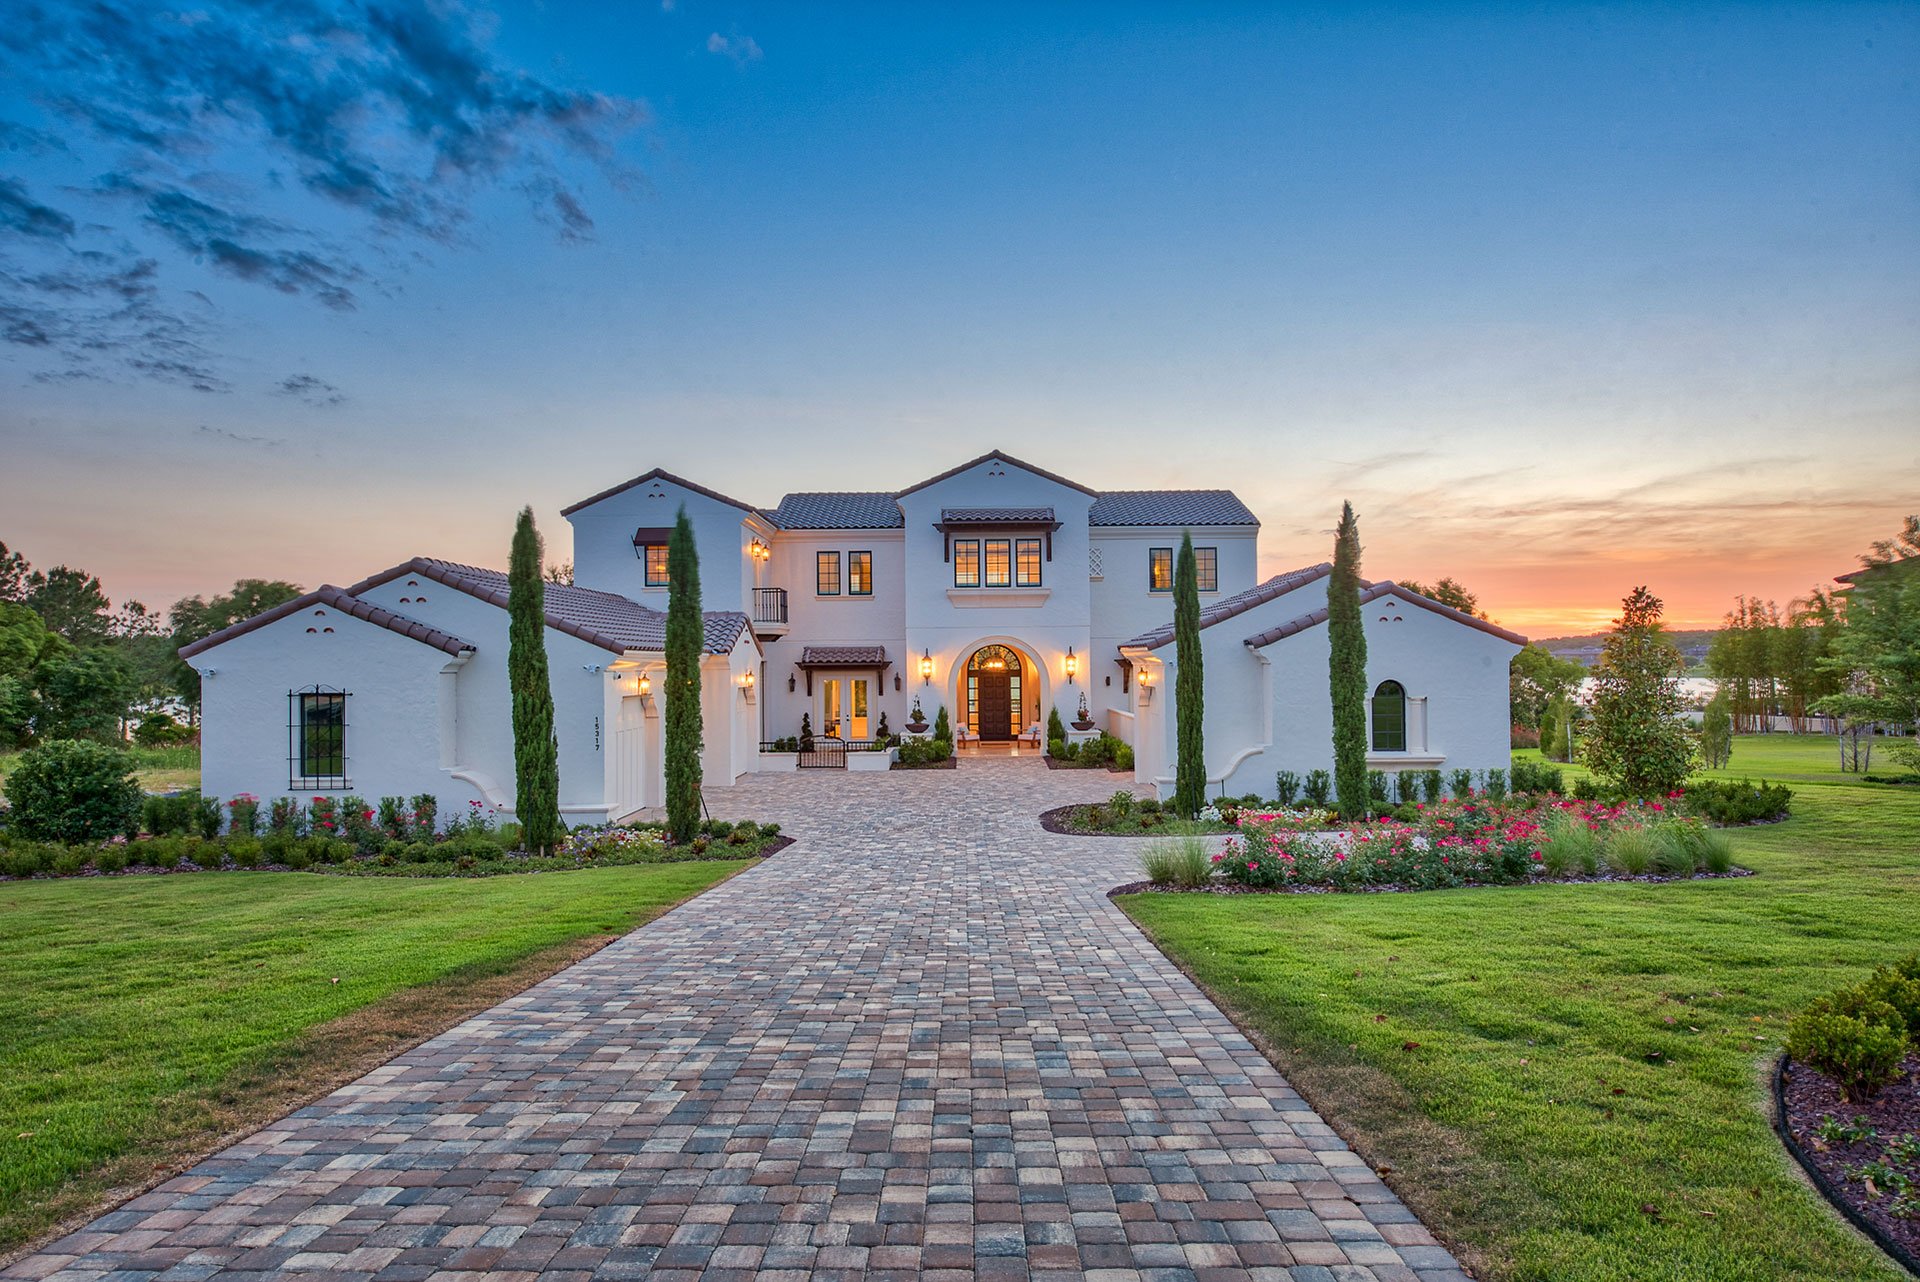 7 Reasons to Invest in a Luxury Home in a Gated Community